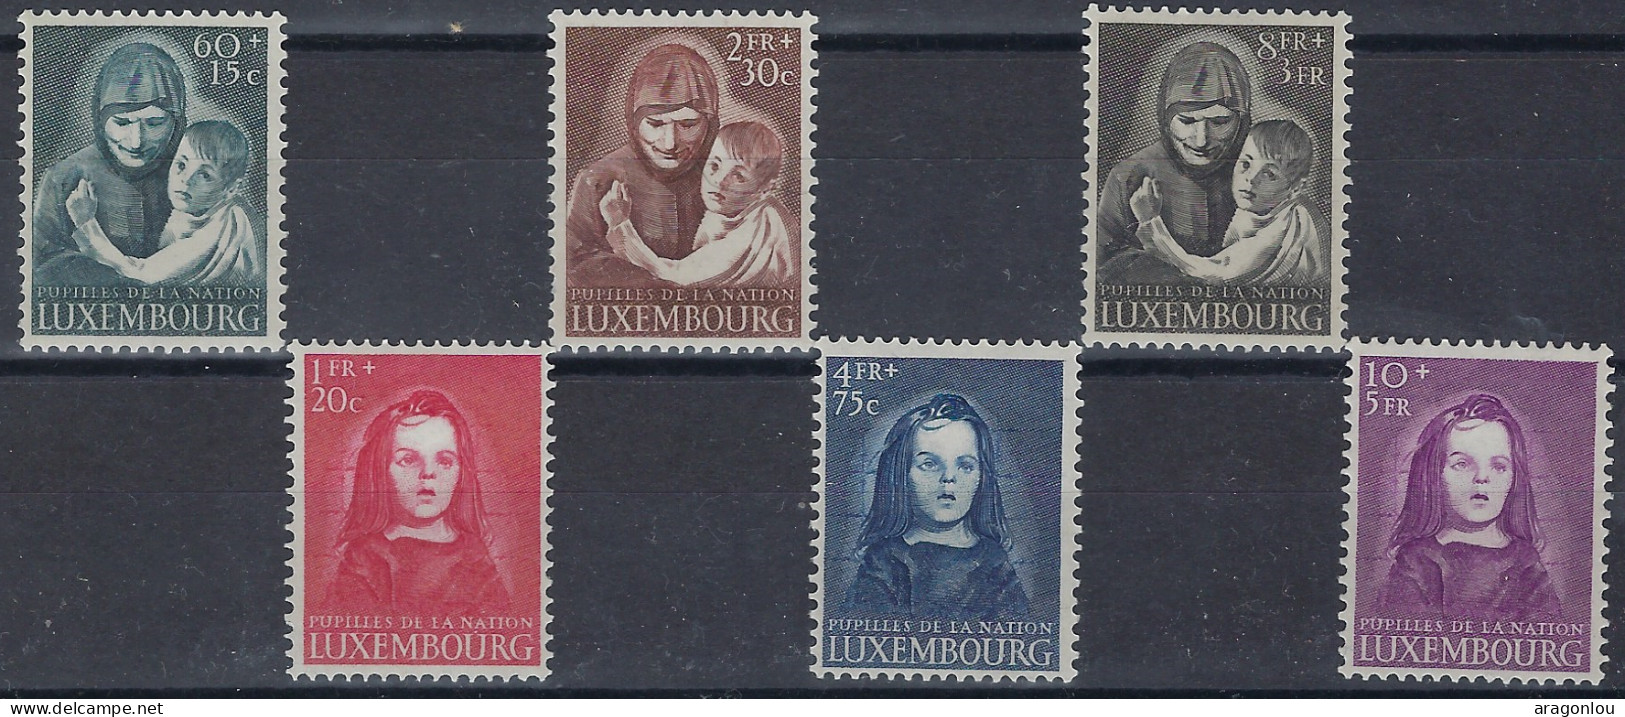 Luxembourg - Luxemburg - Timbre - 1950   Orpfélins De Guerre   Série   *   VC. 120,- - Used Stamps